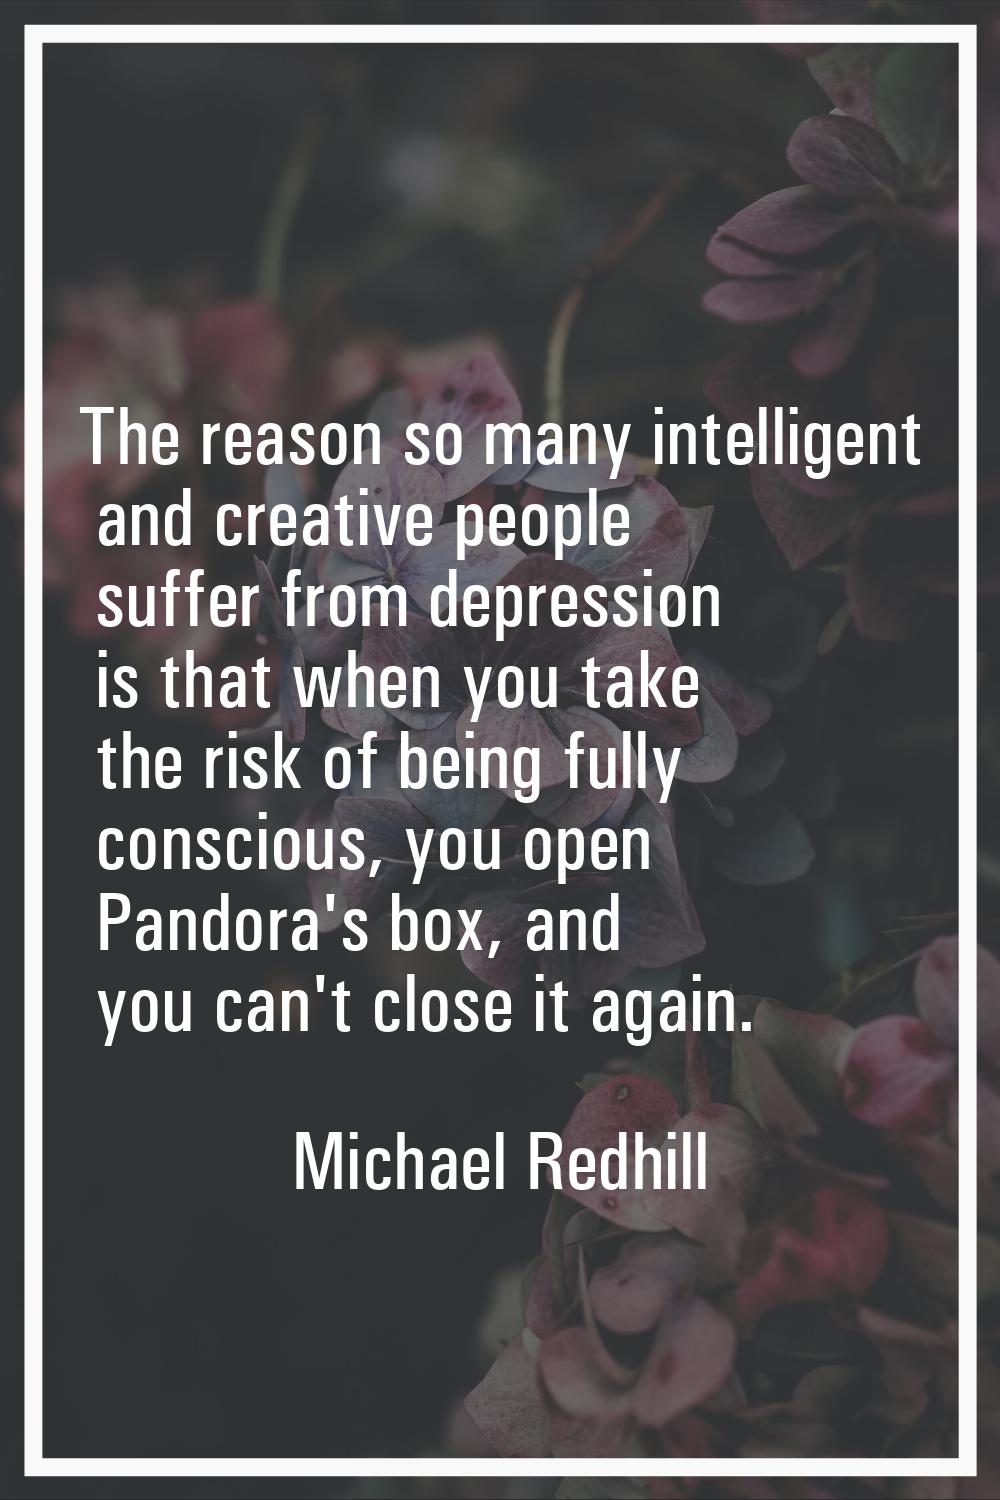 The reason so many intelligent and creative people suffer from depression is that when you take the